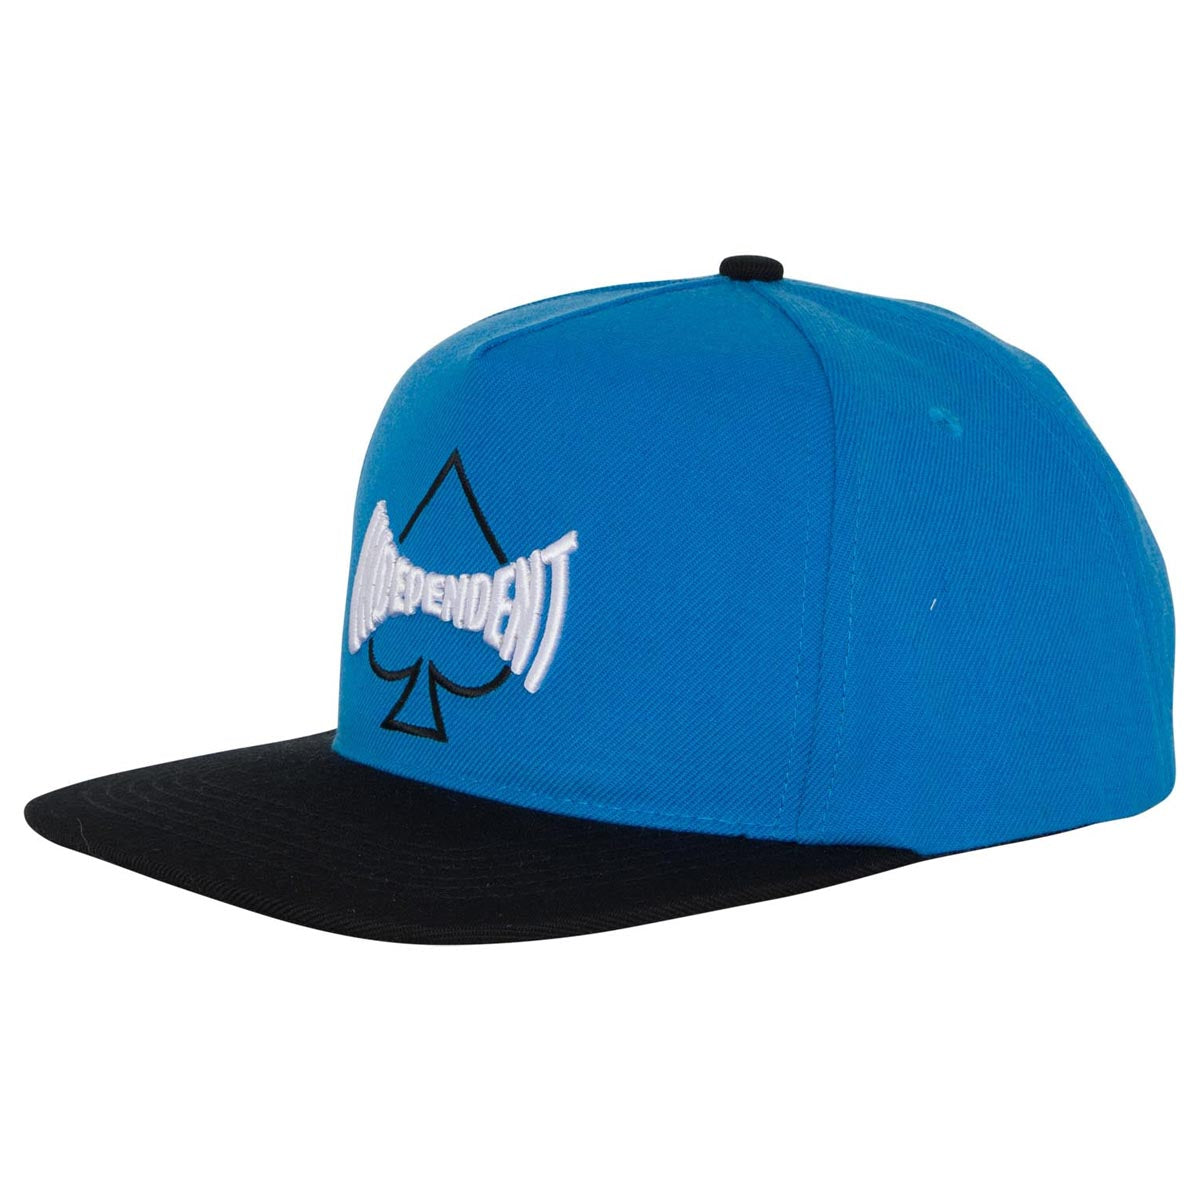 Independent Can't Be Beat Snapback Hat - Blue/Black image 1